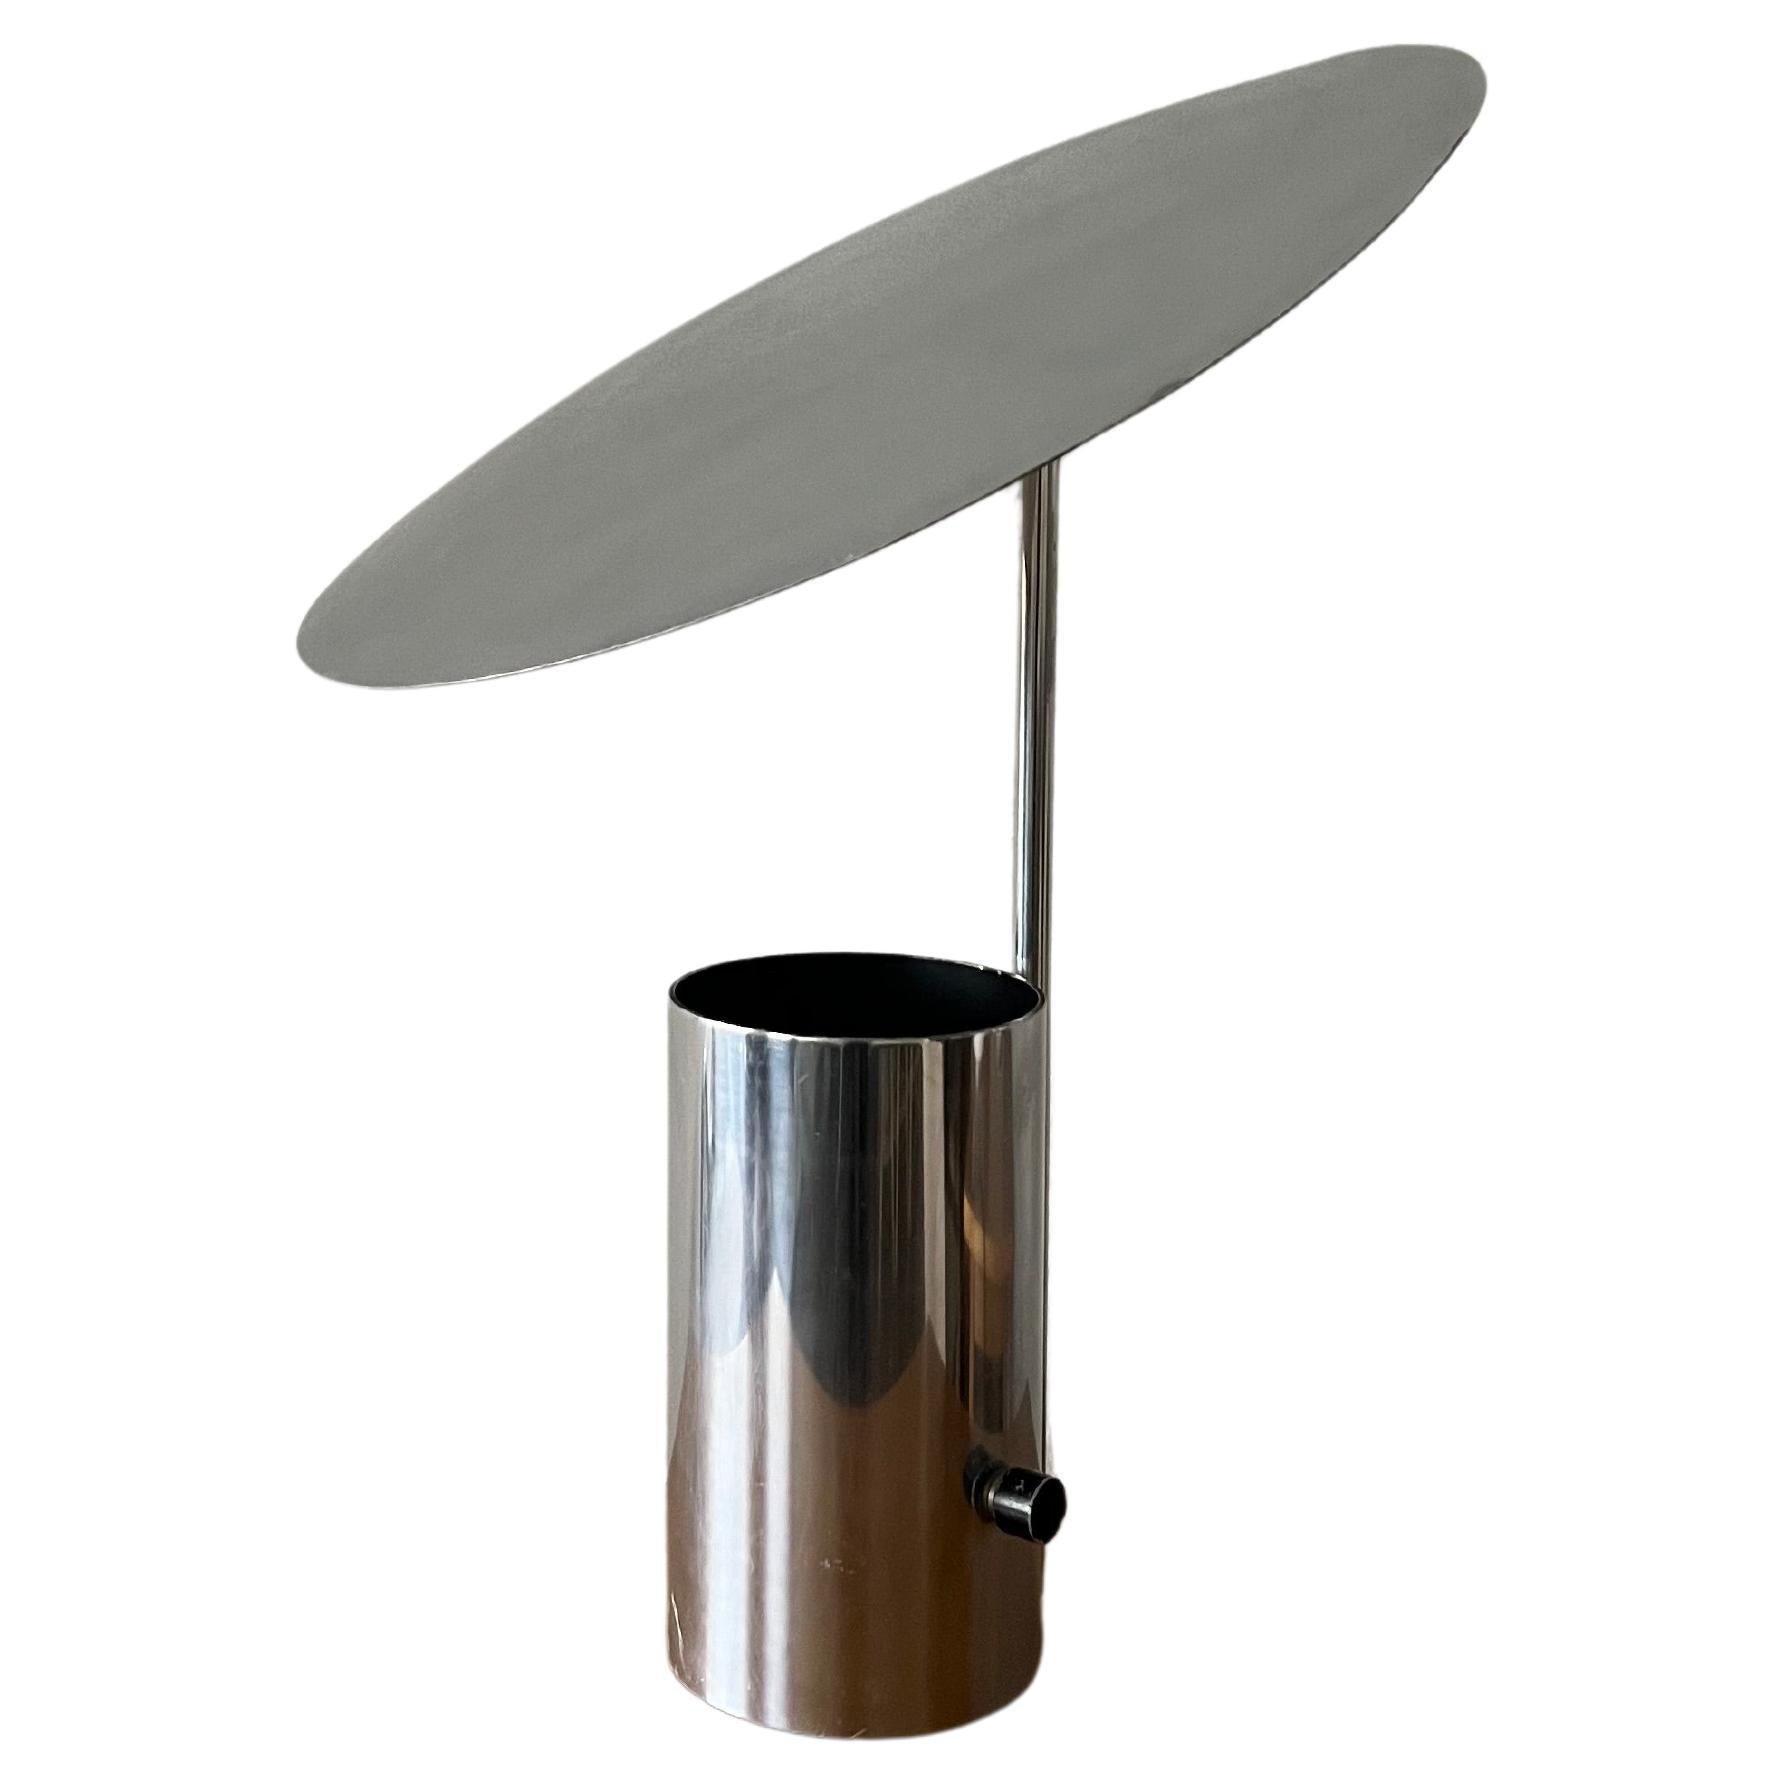 George Nelson "Half Nelson" Table Lamp by Koch & Lowy, 1960s For Sale